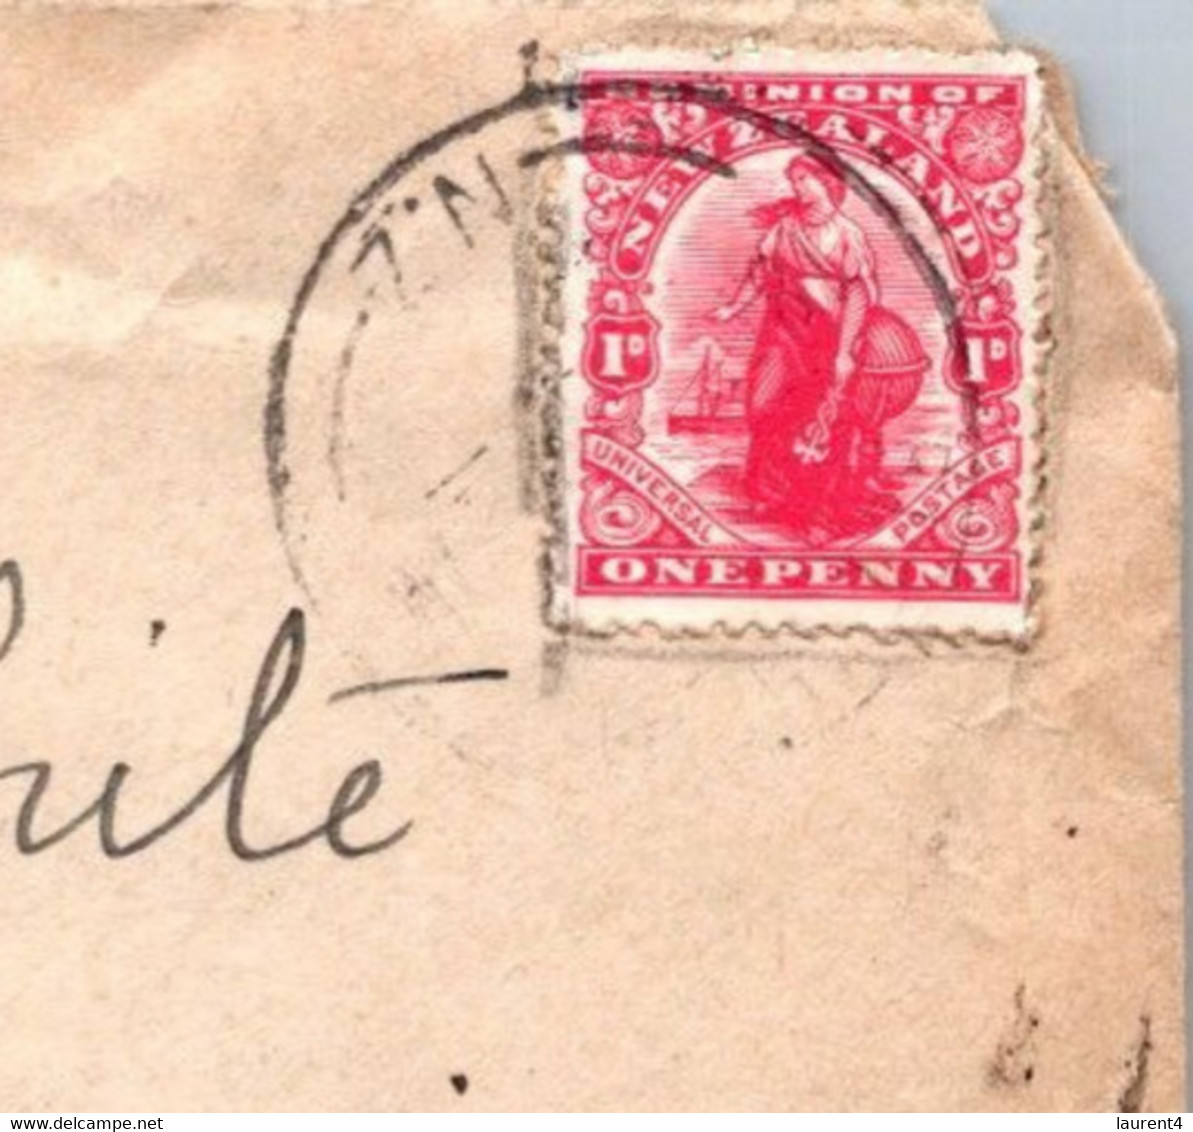 (3 A 18) New Zealand Postmark On Cover (1 Cover)  Letter 9with Content) 1926 - Cartas & Documentos